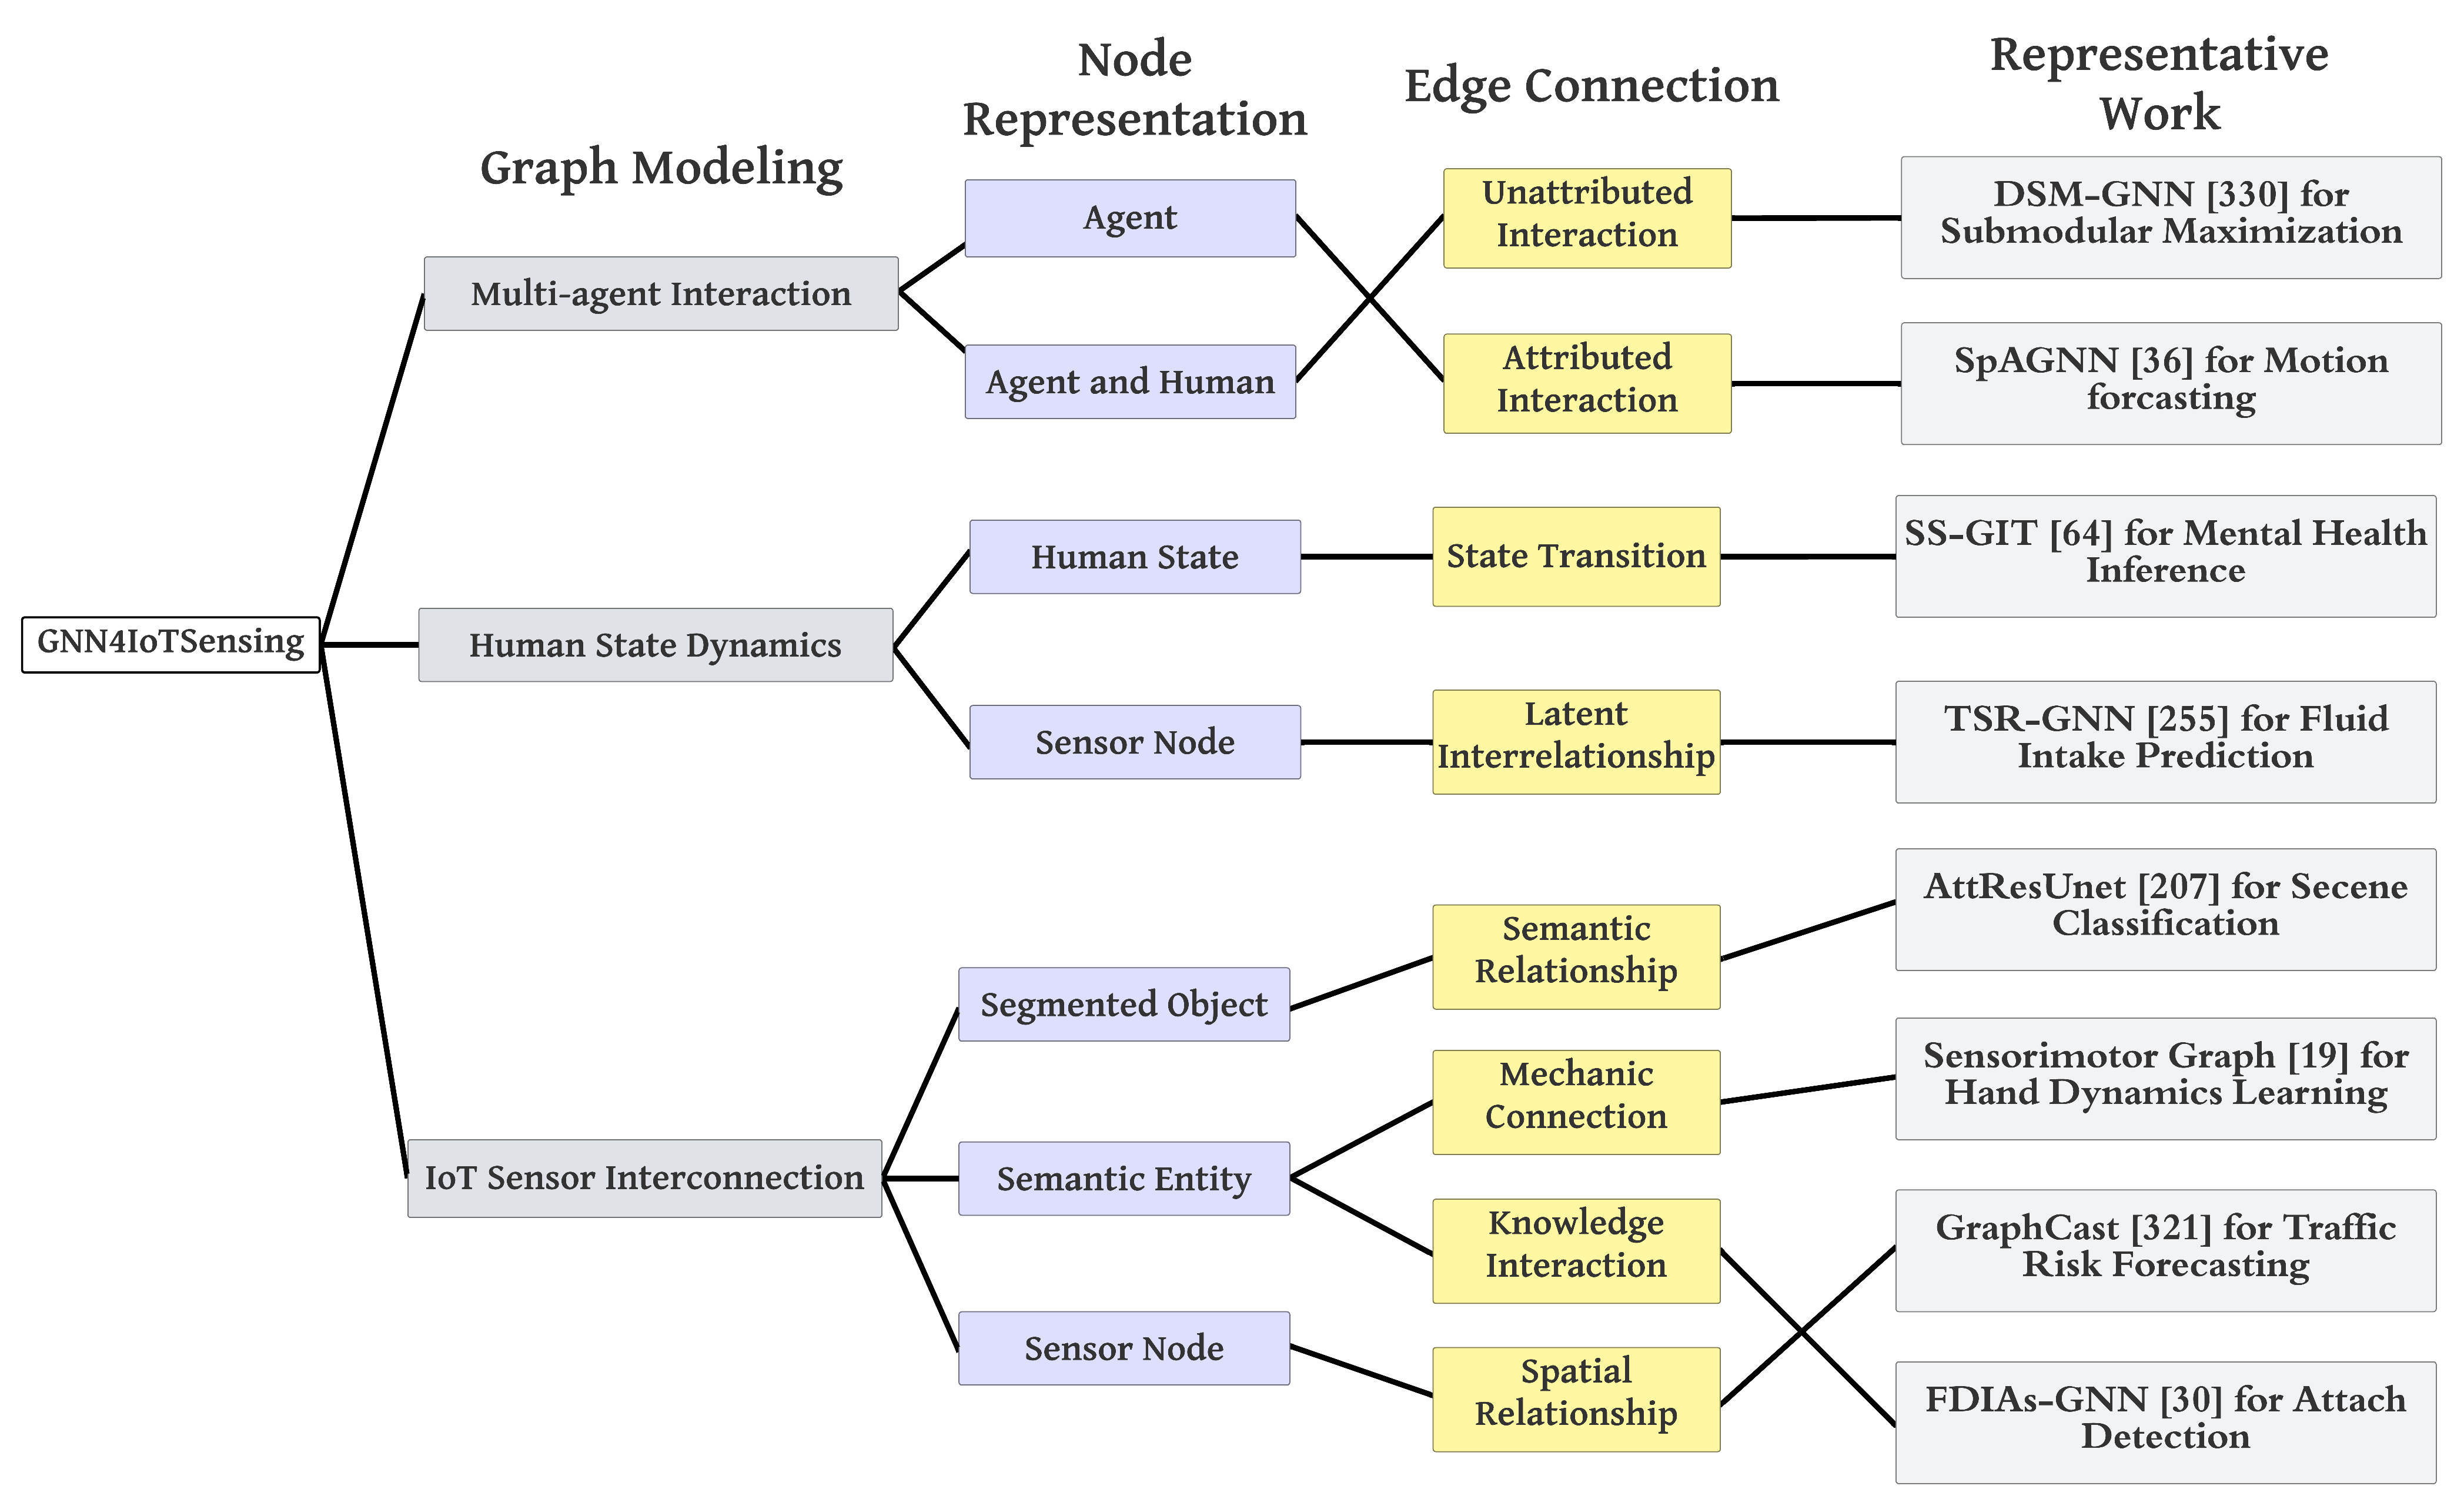 Summary Diagram of Categorization of Graph Neural Networks in IoT